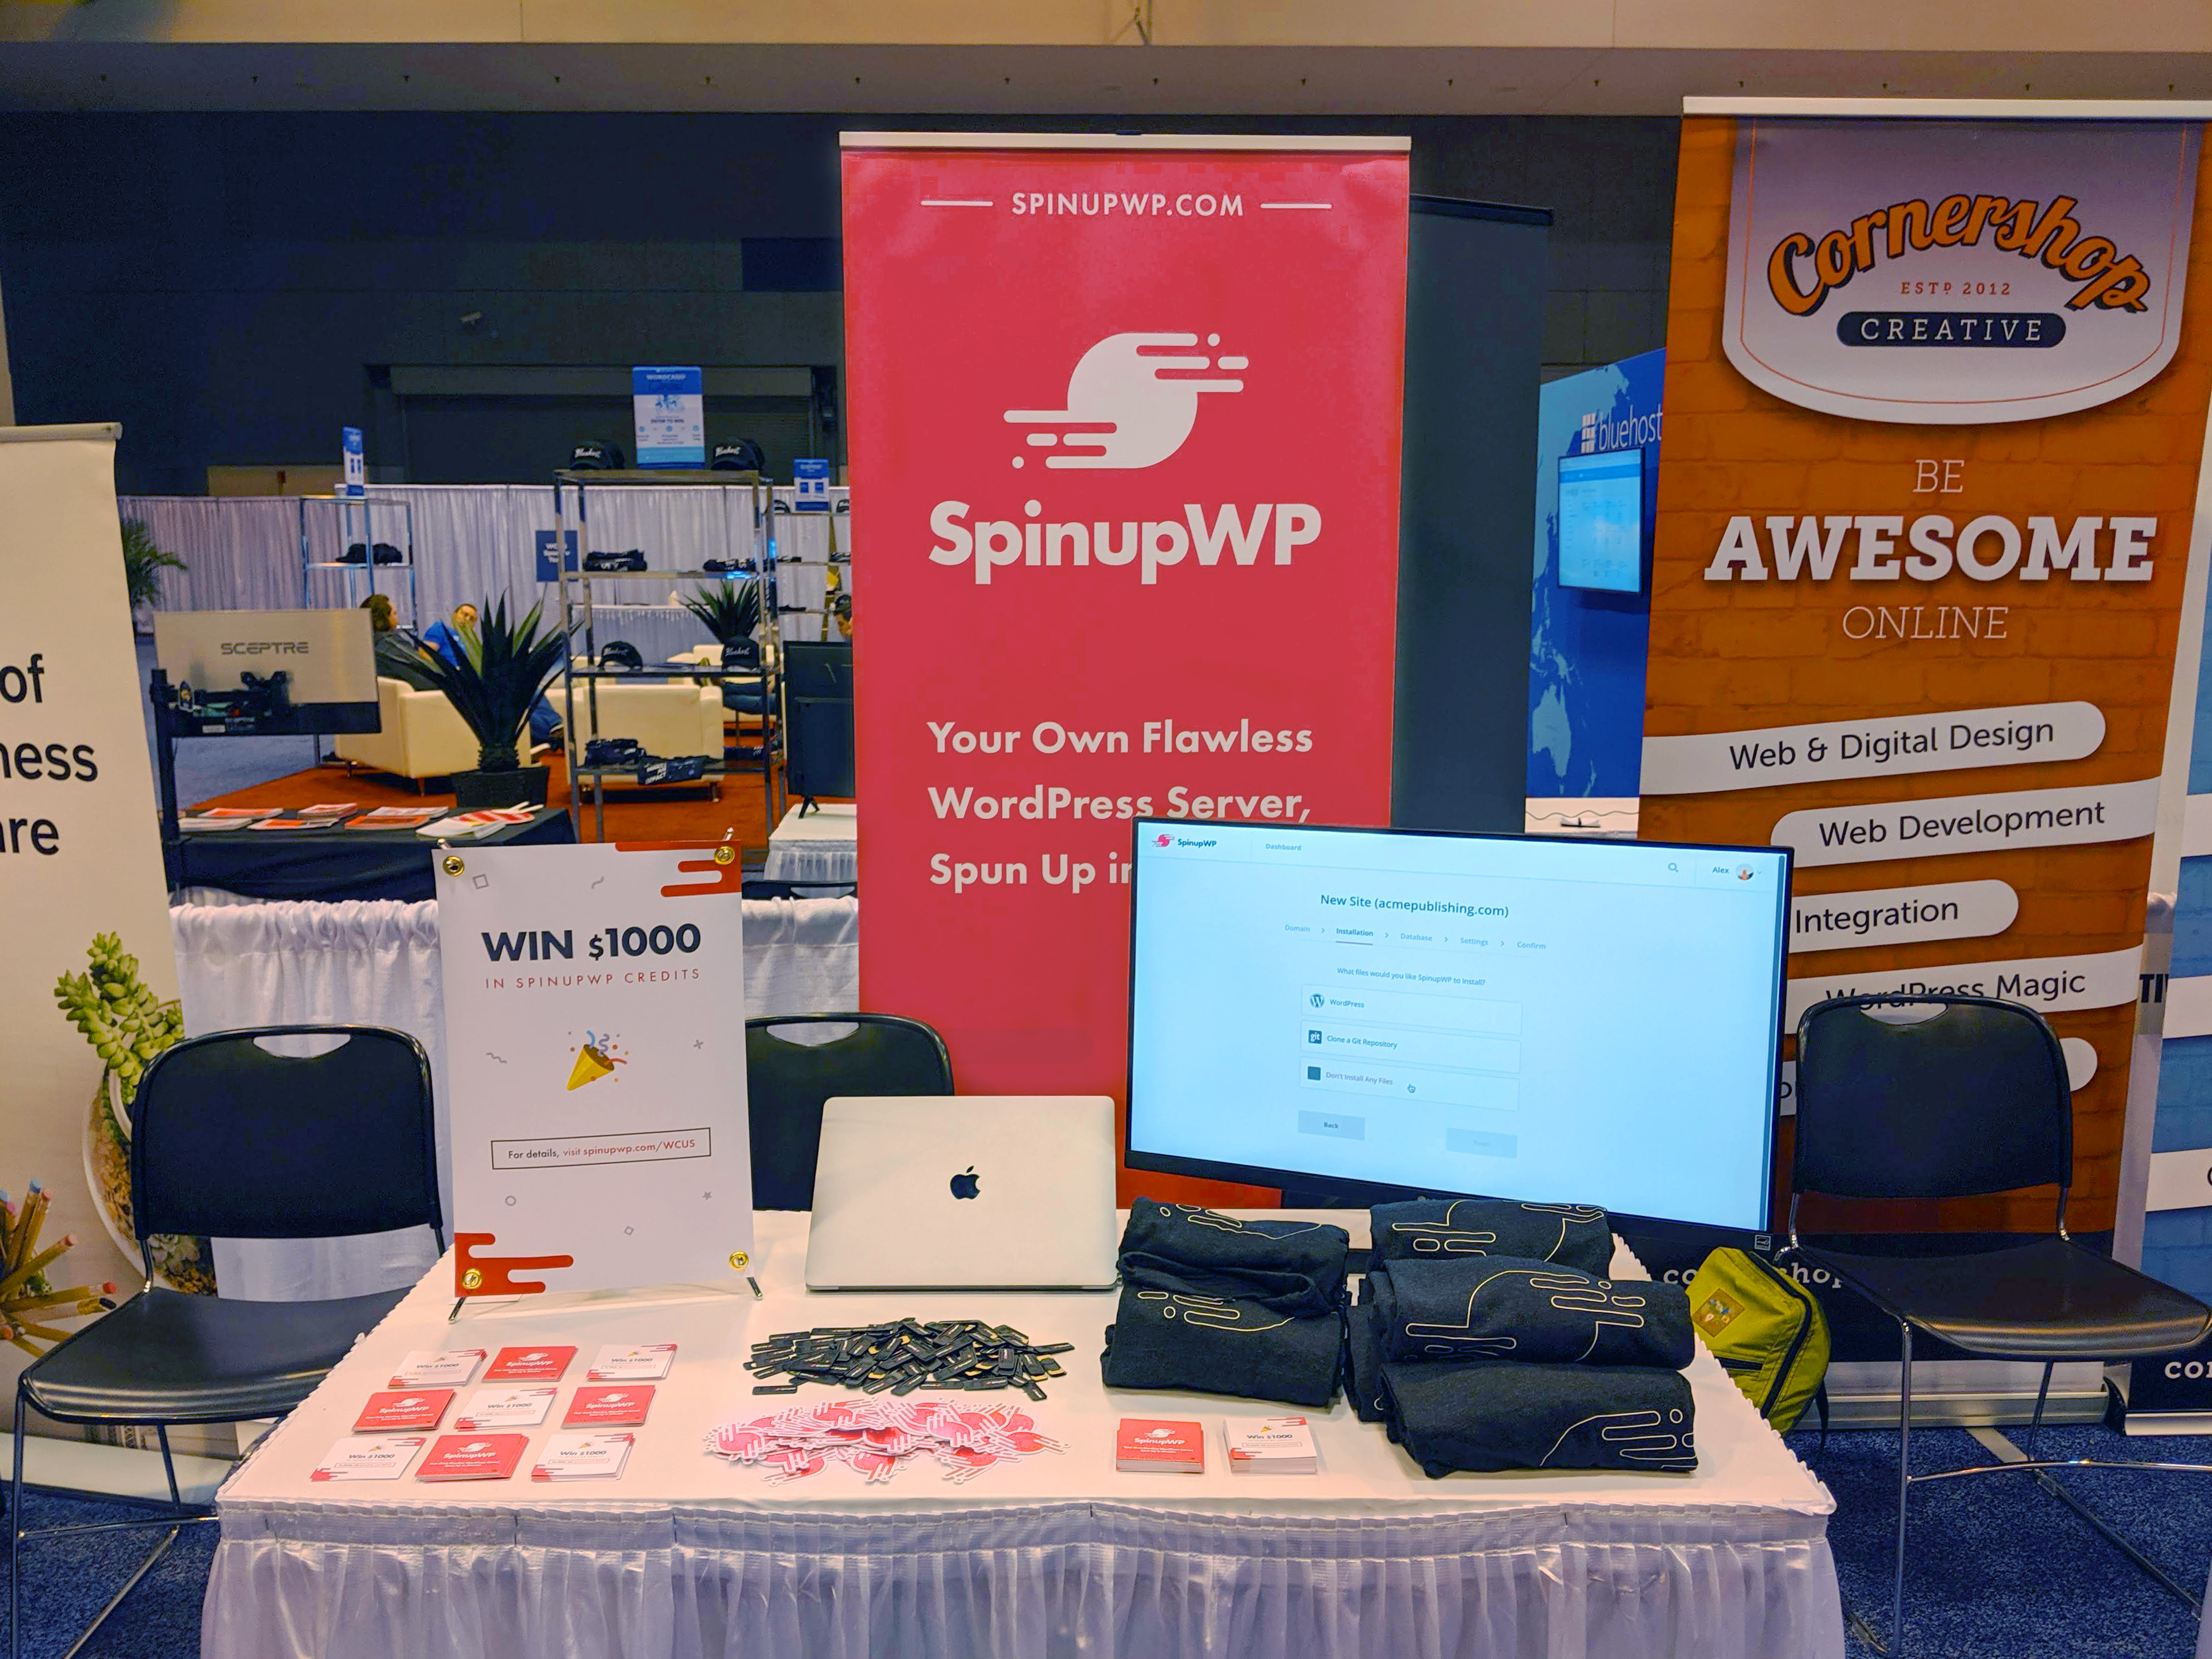 SpinupWP booth at WCUS